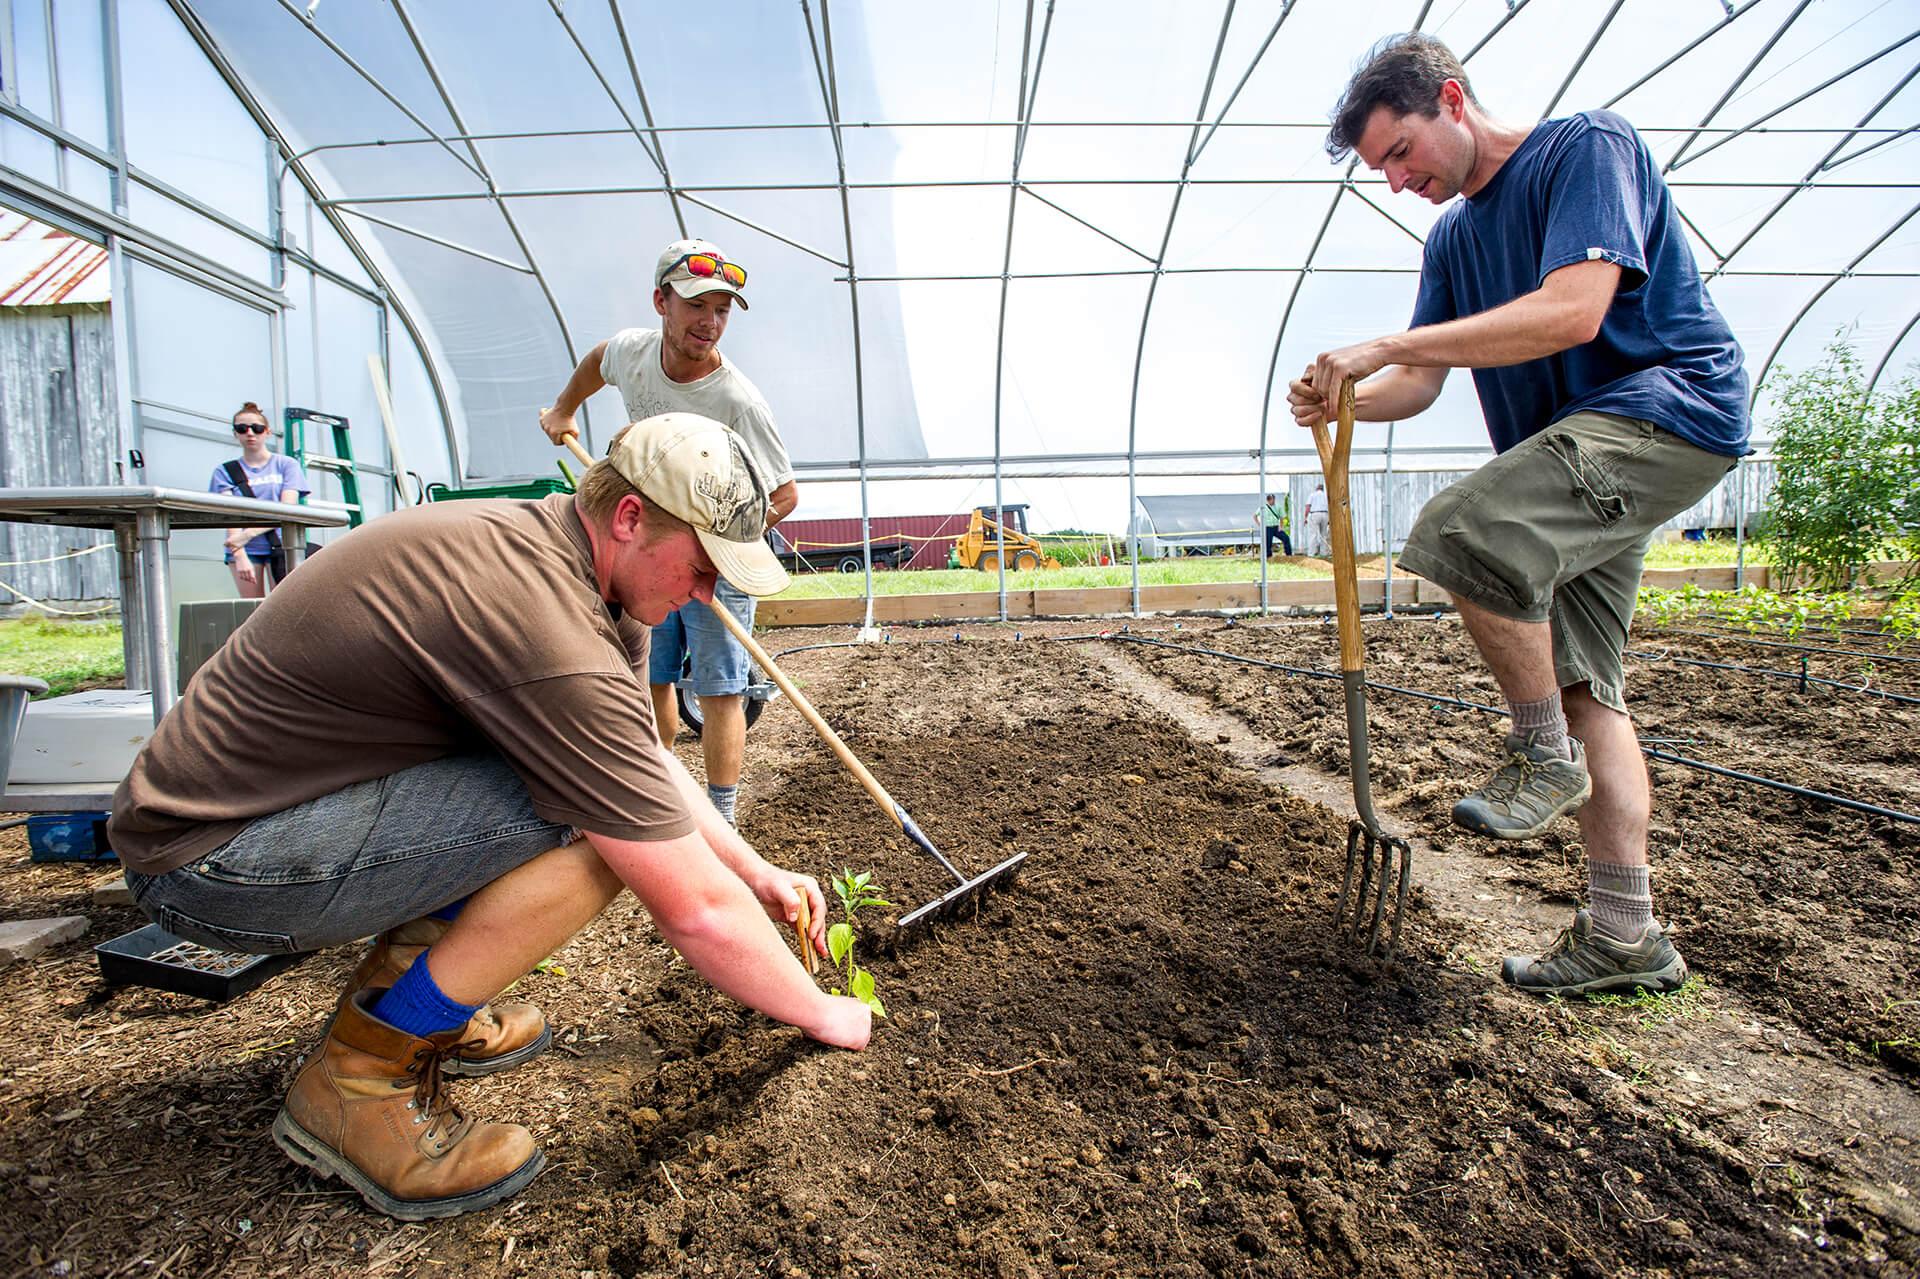 Group of three farmers working on planting crops in a high tunnel soil bed